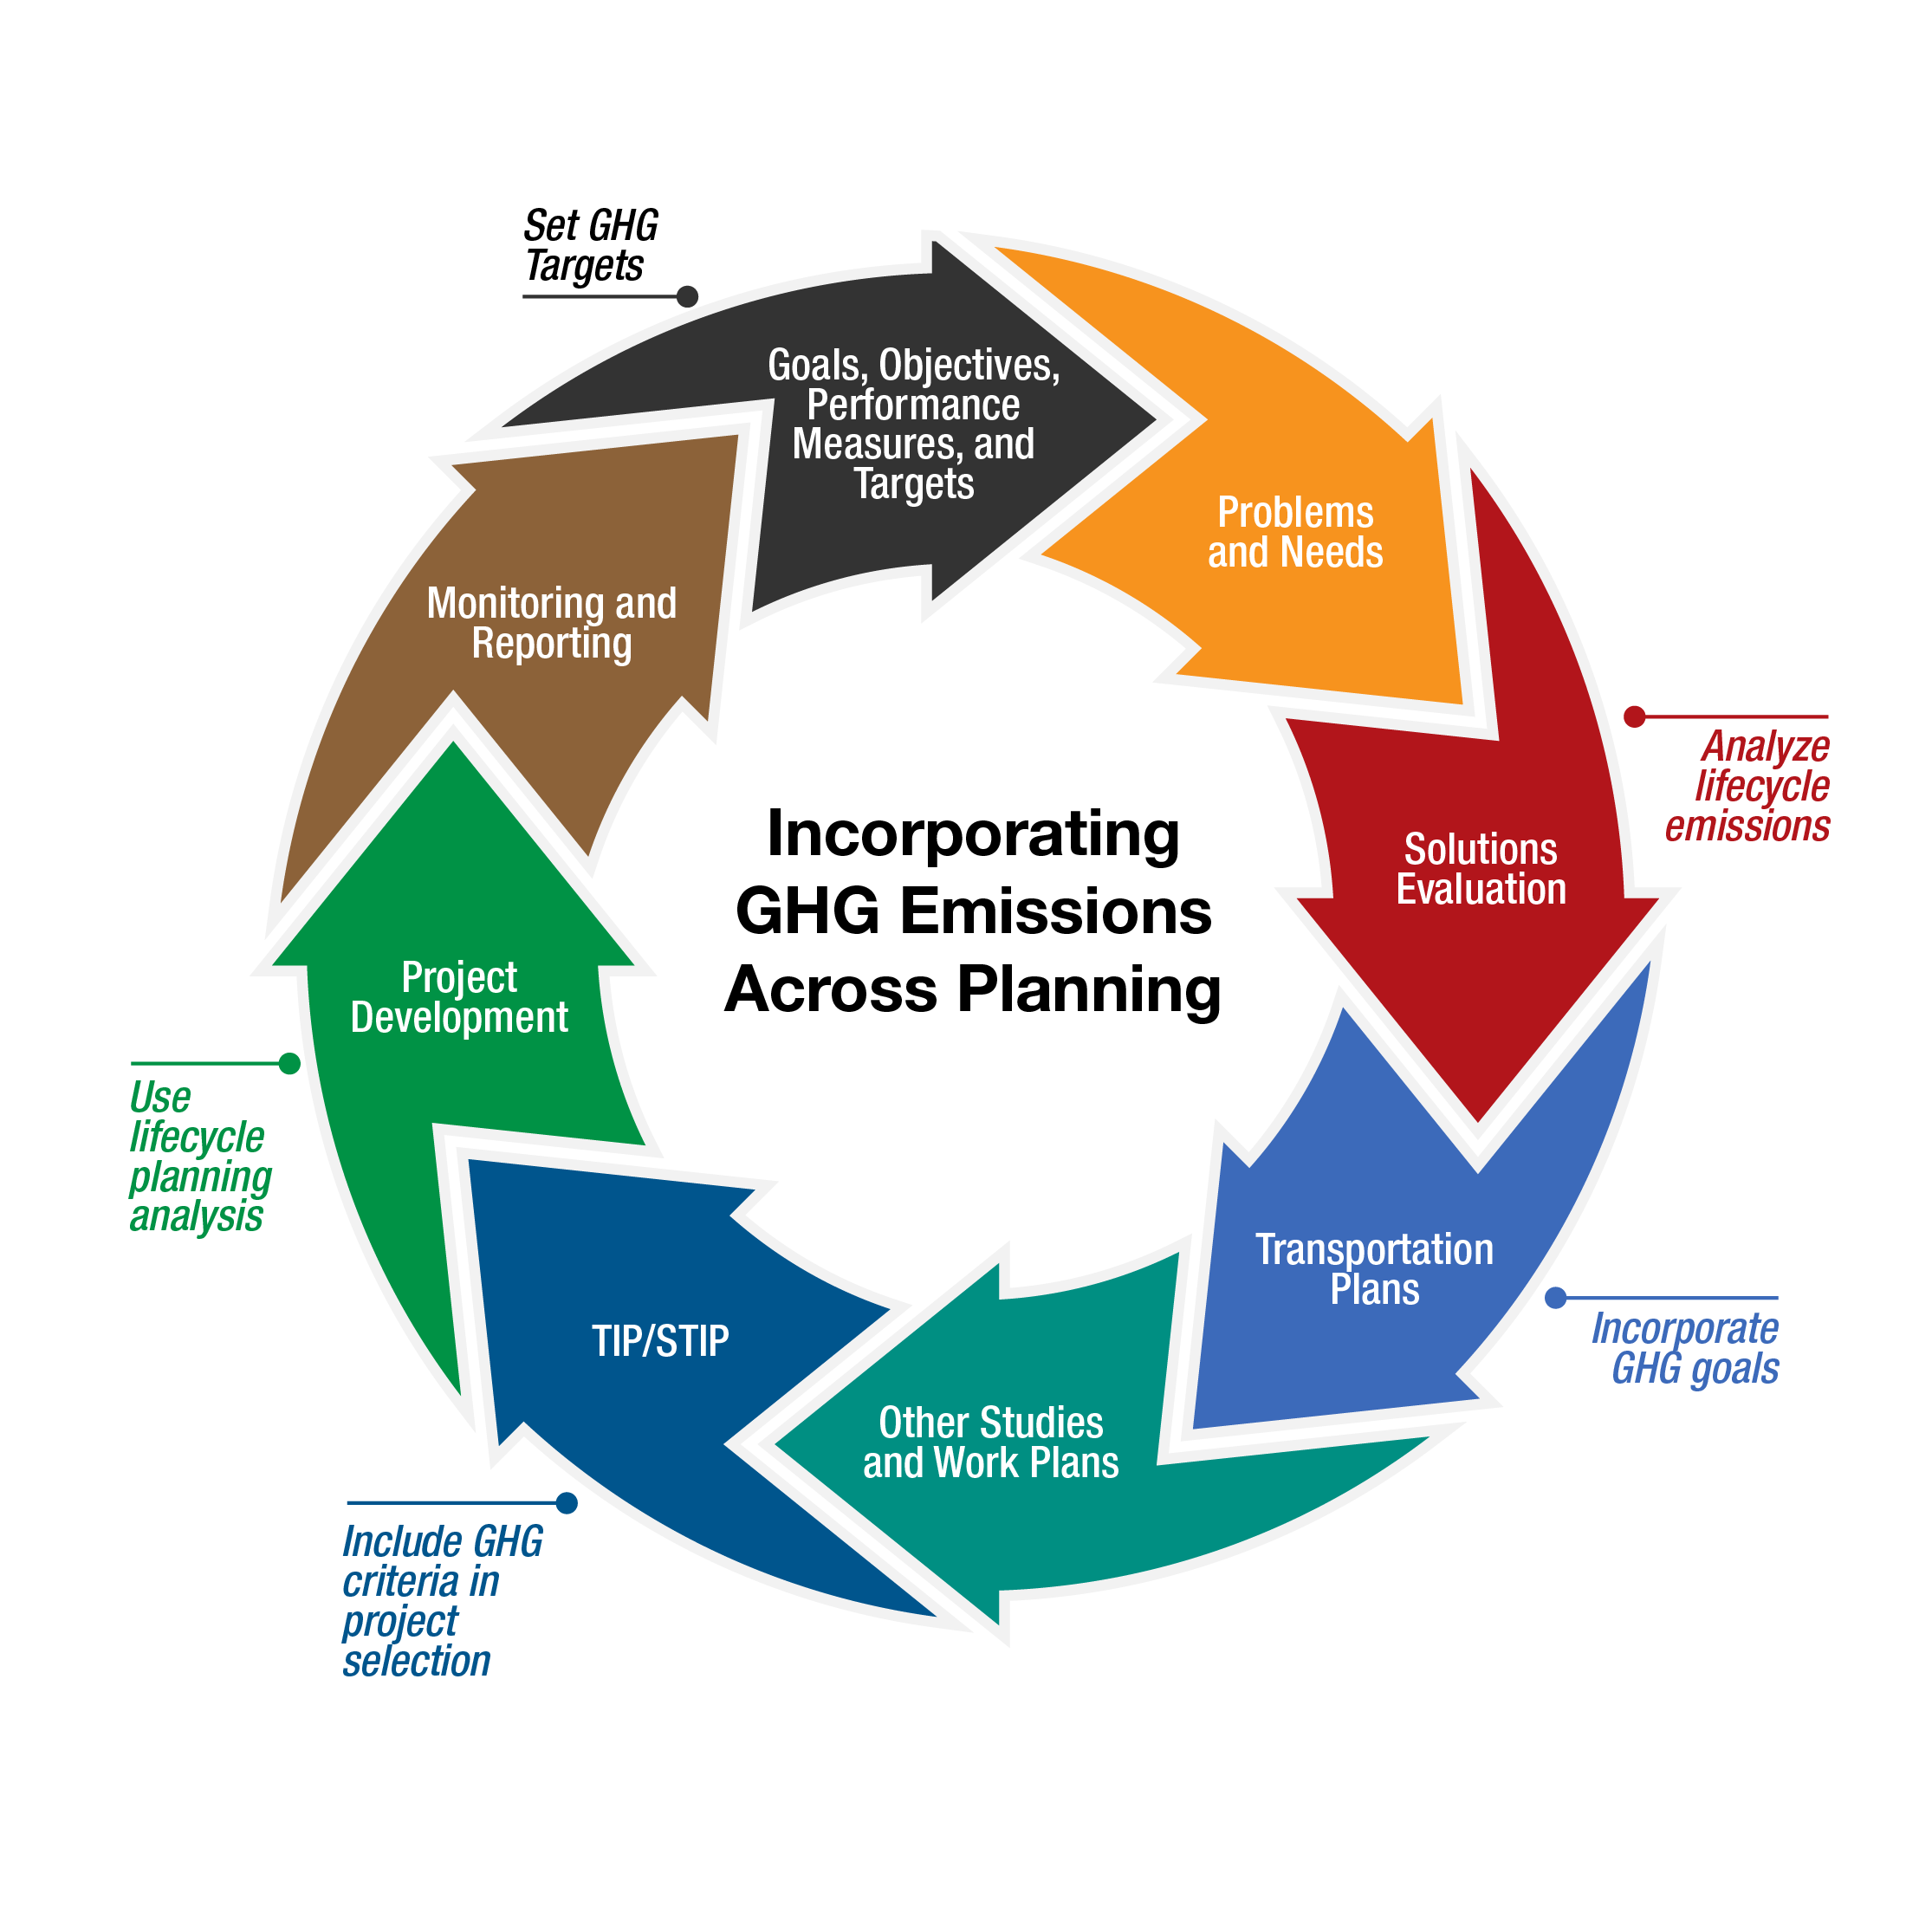 Incorporating GHG Emissions Across Planning Wheel graphic